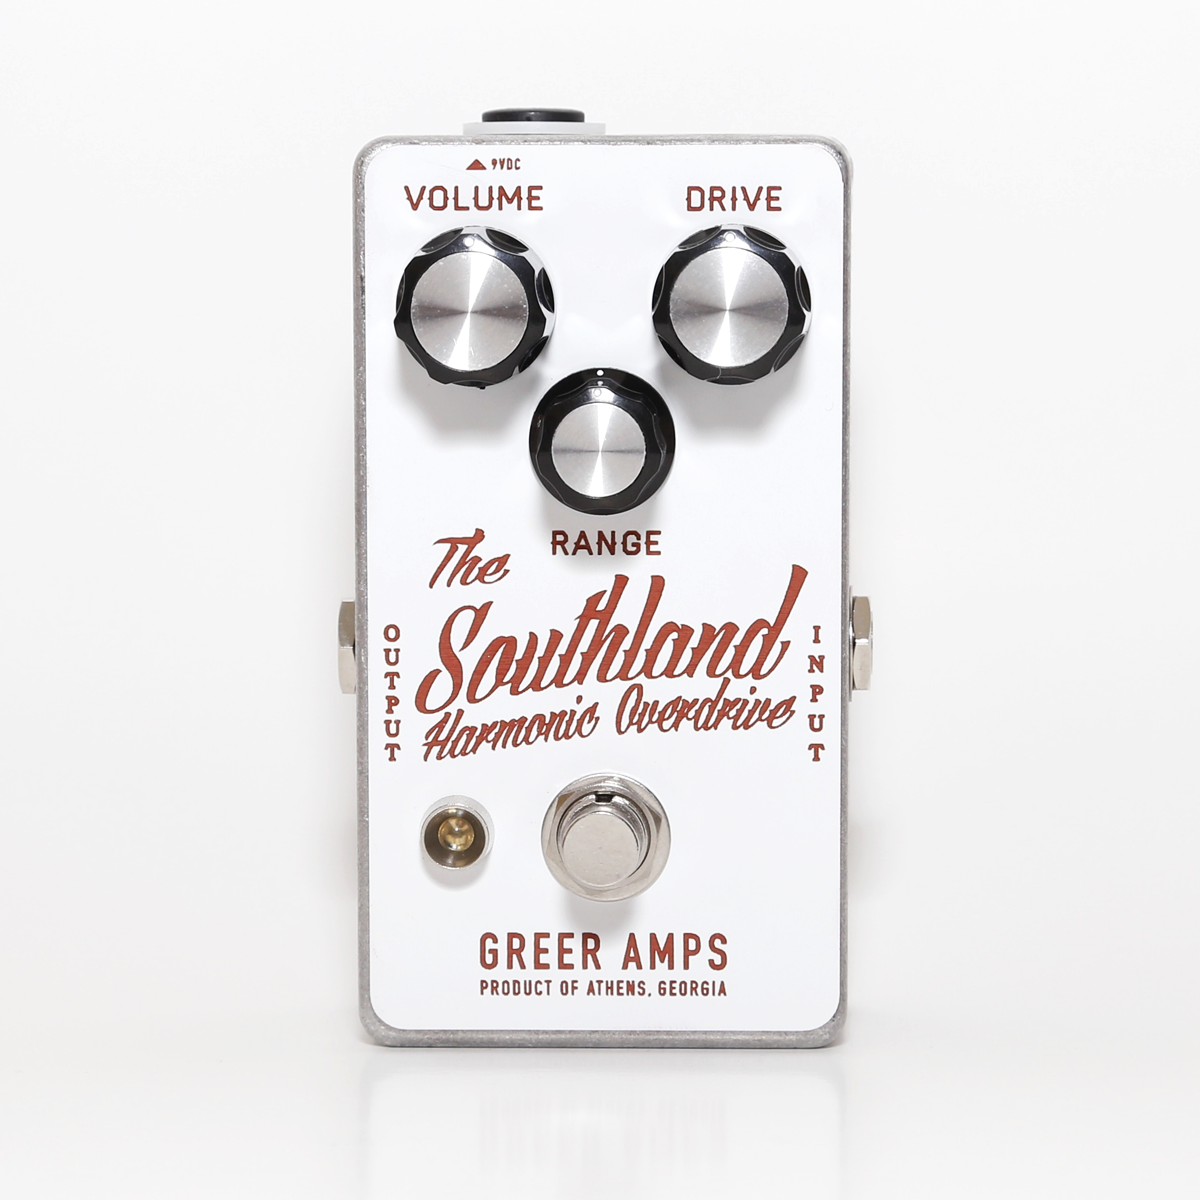 Southland Harmonic Overdrive - Greer Amps